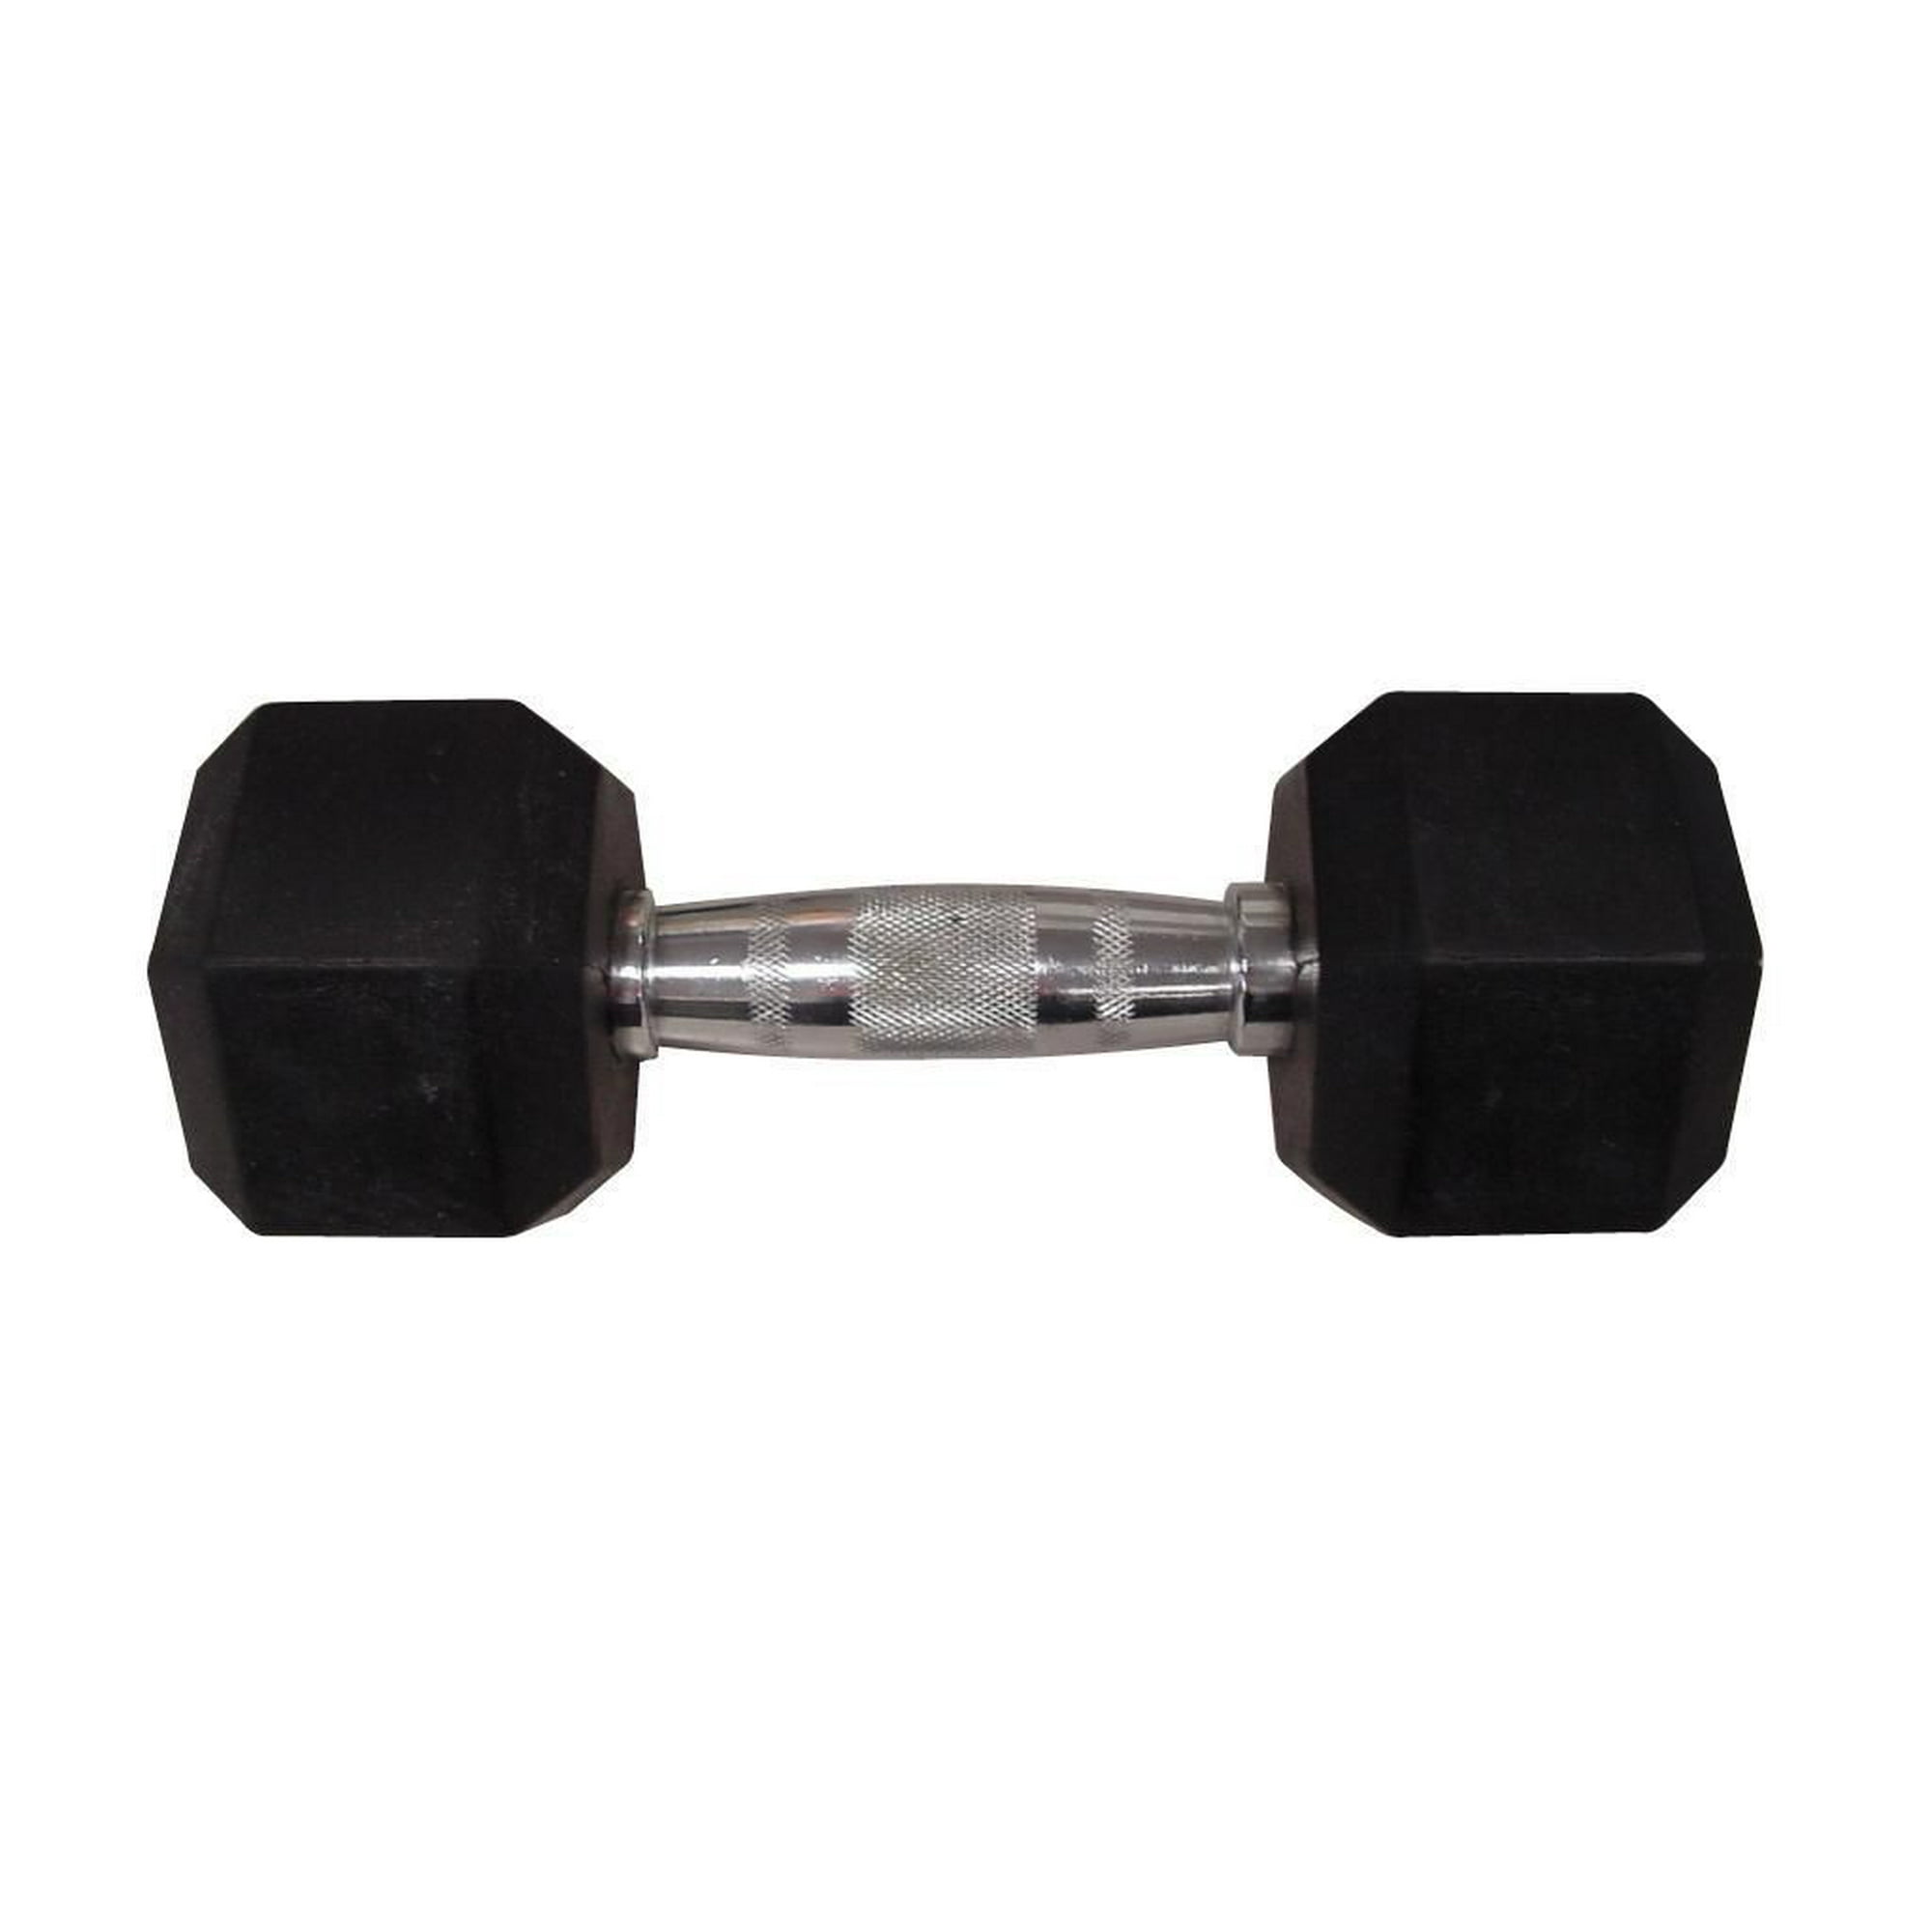 Soozier Set of 2 Hex Dumbbell Weights, Rubber Lift Weights for Strength  Training, 15 Lbs./Single, Black